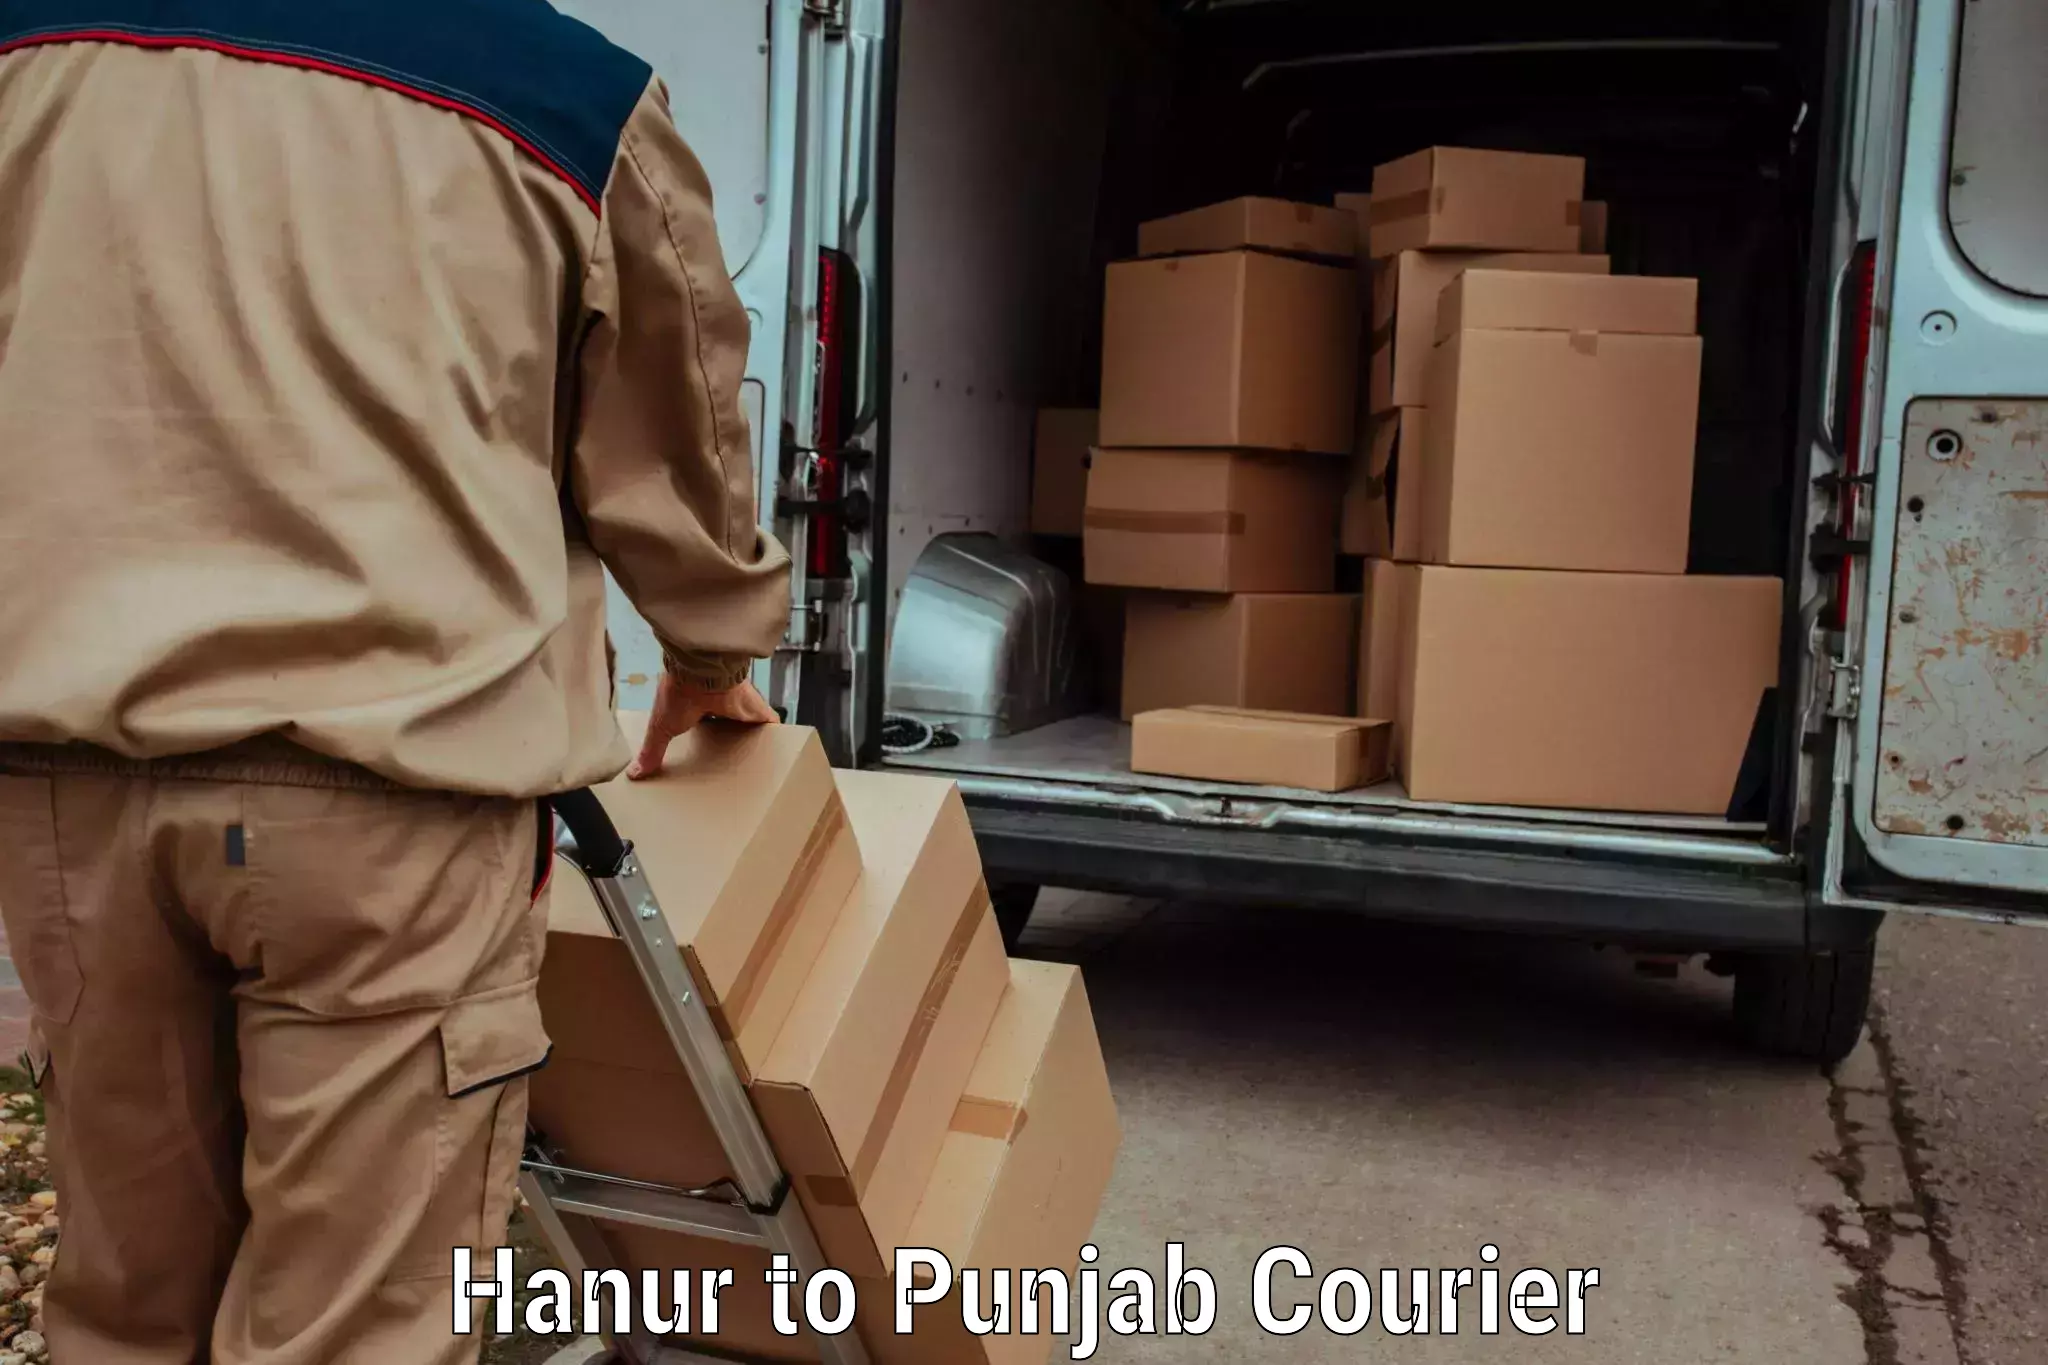 Courier service booking Hanur to Malerkotla